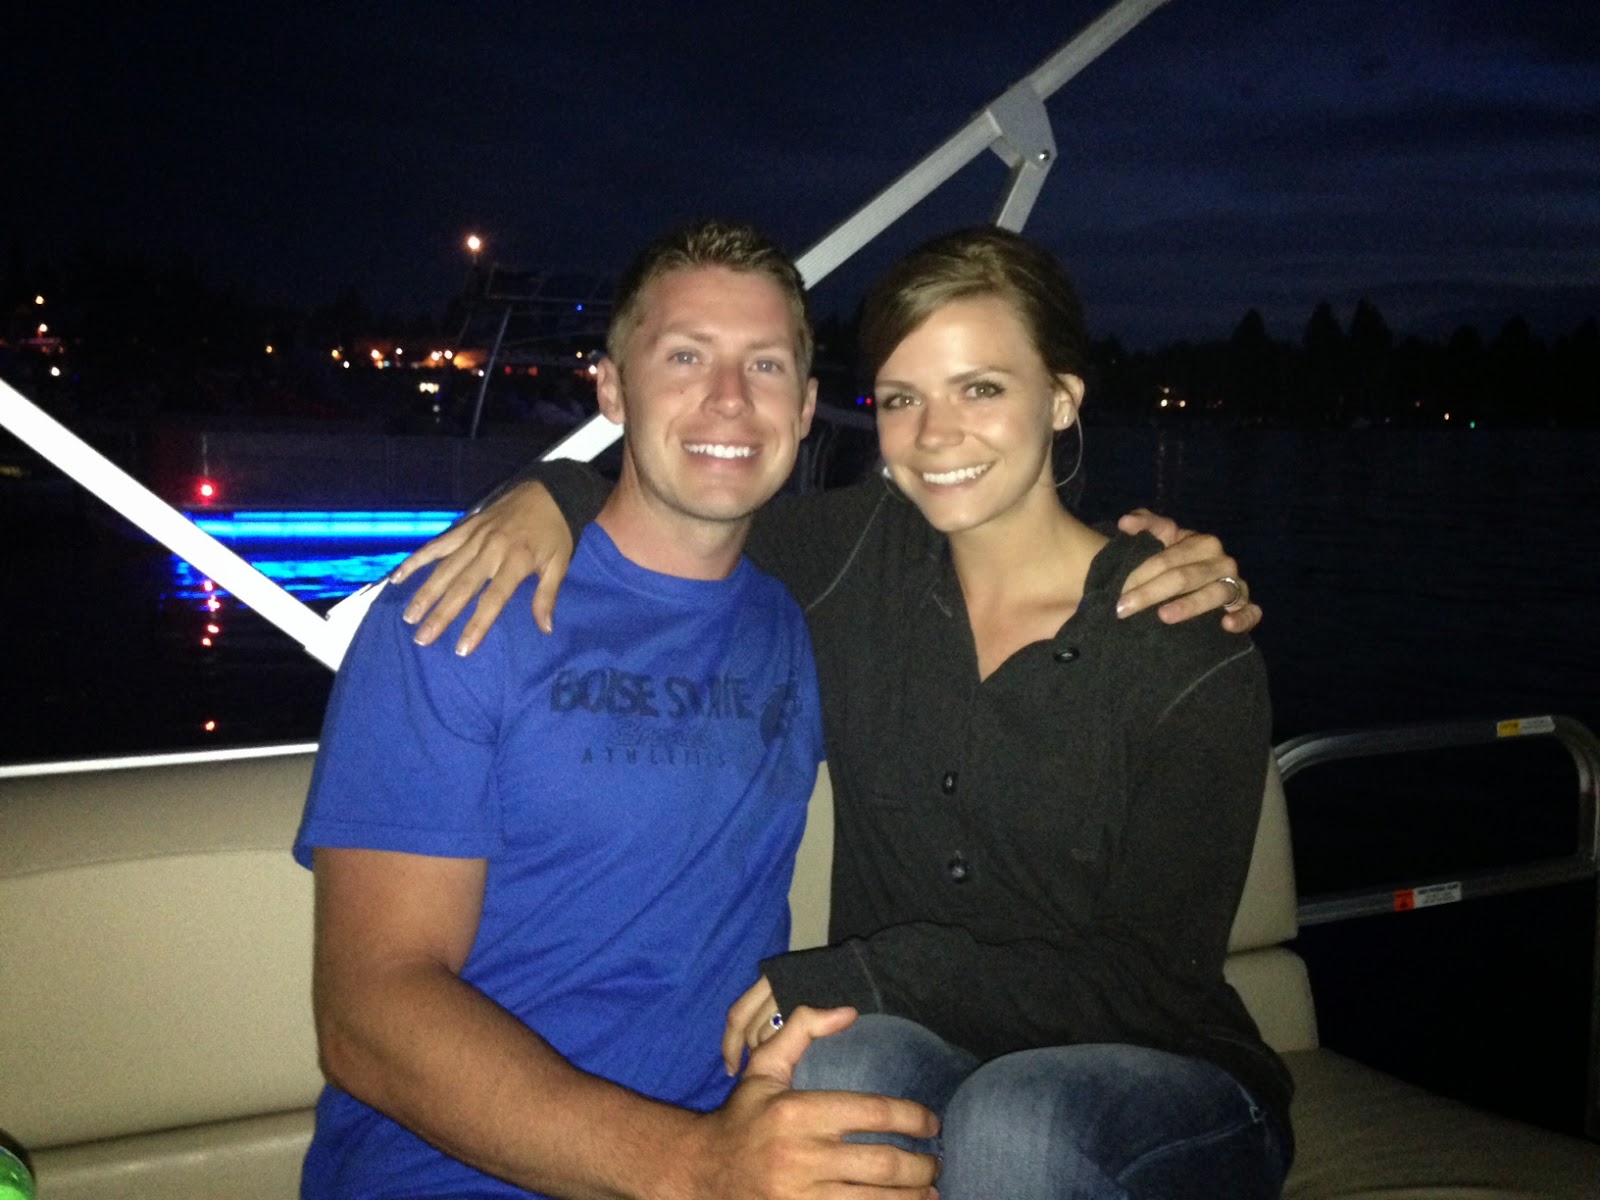 4th of July at Payette Lake in McCall Idaho